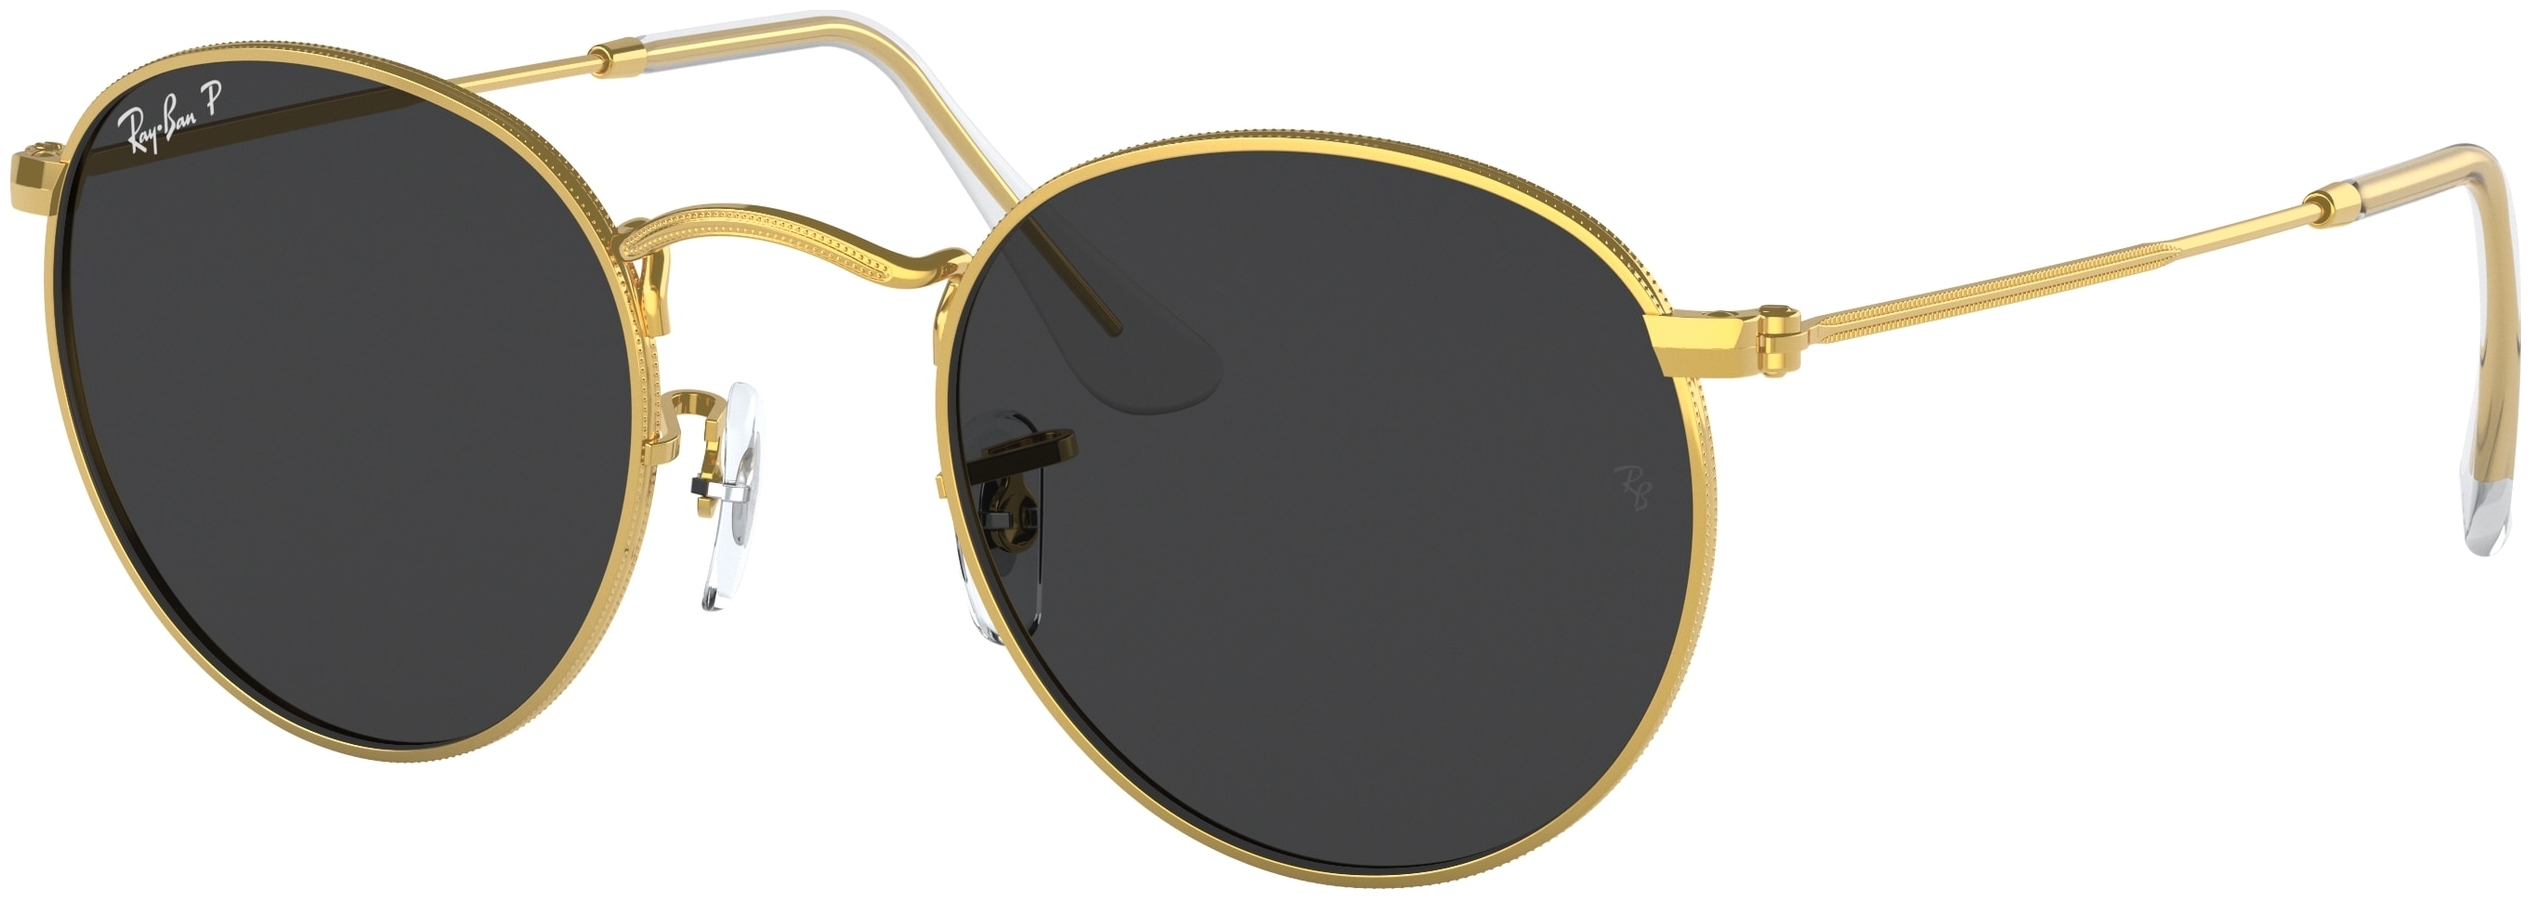  Ray-Ban  RB3447 919648 ROUND METAL